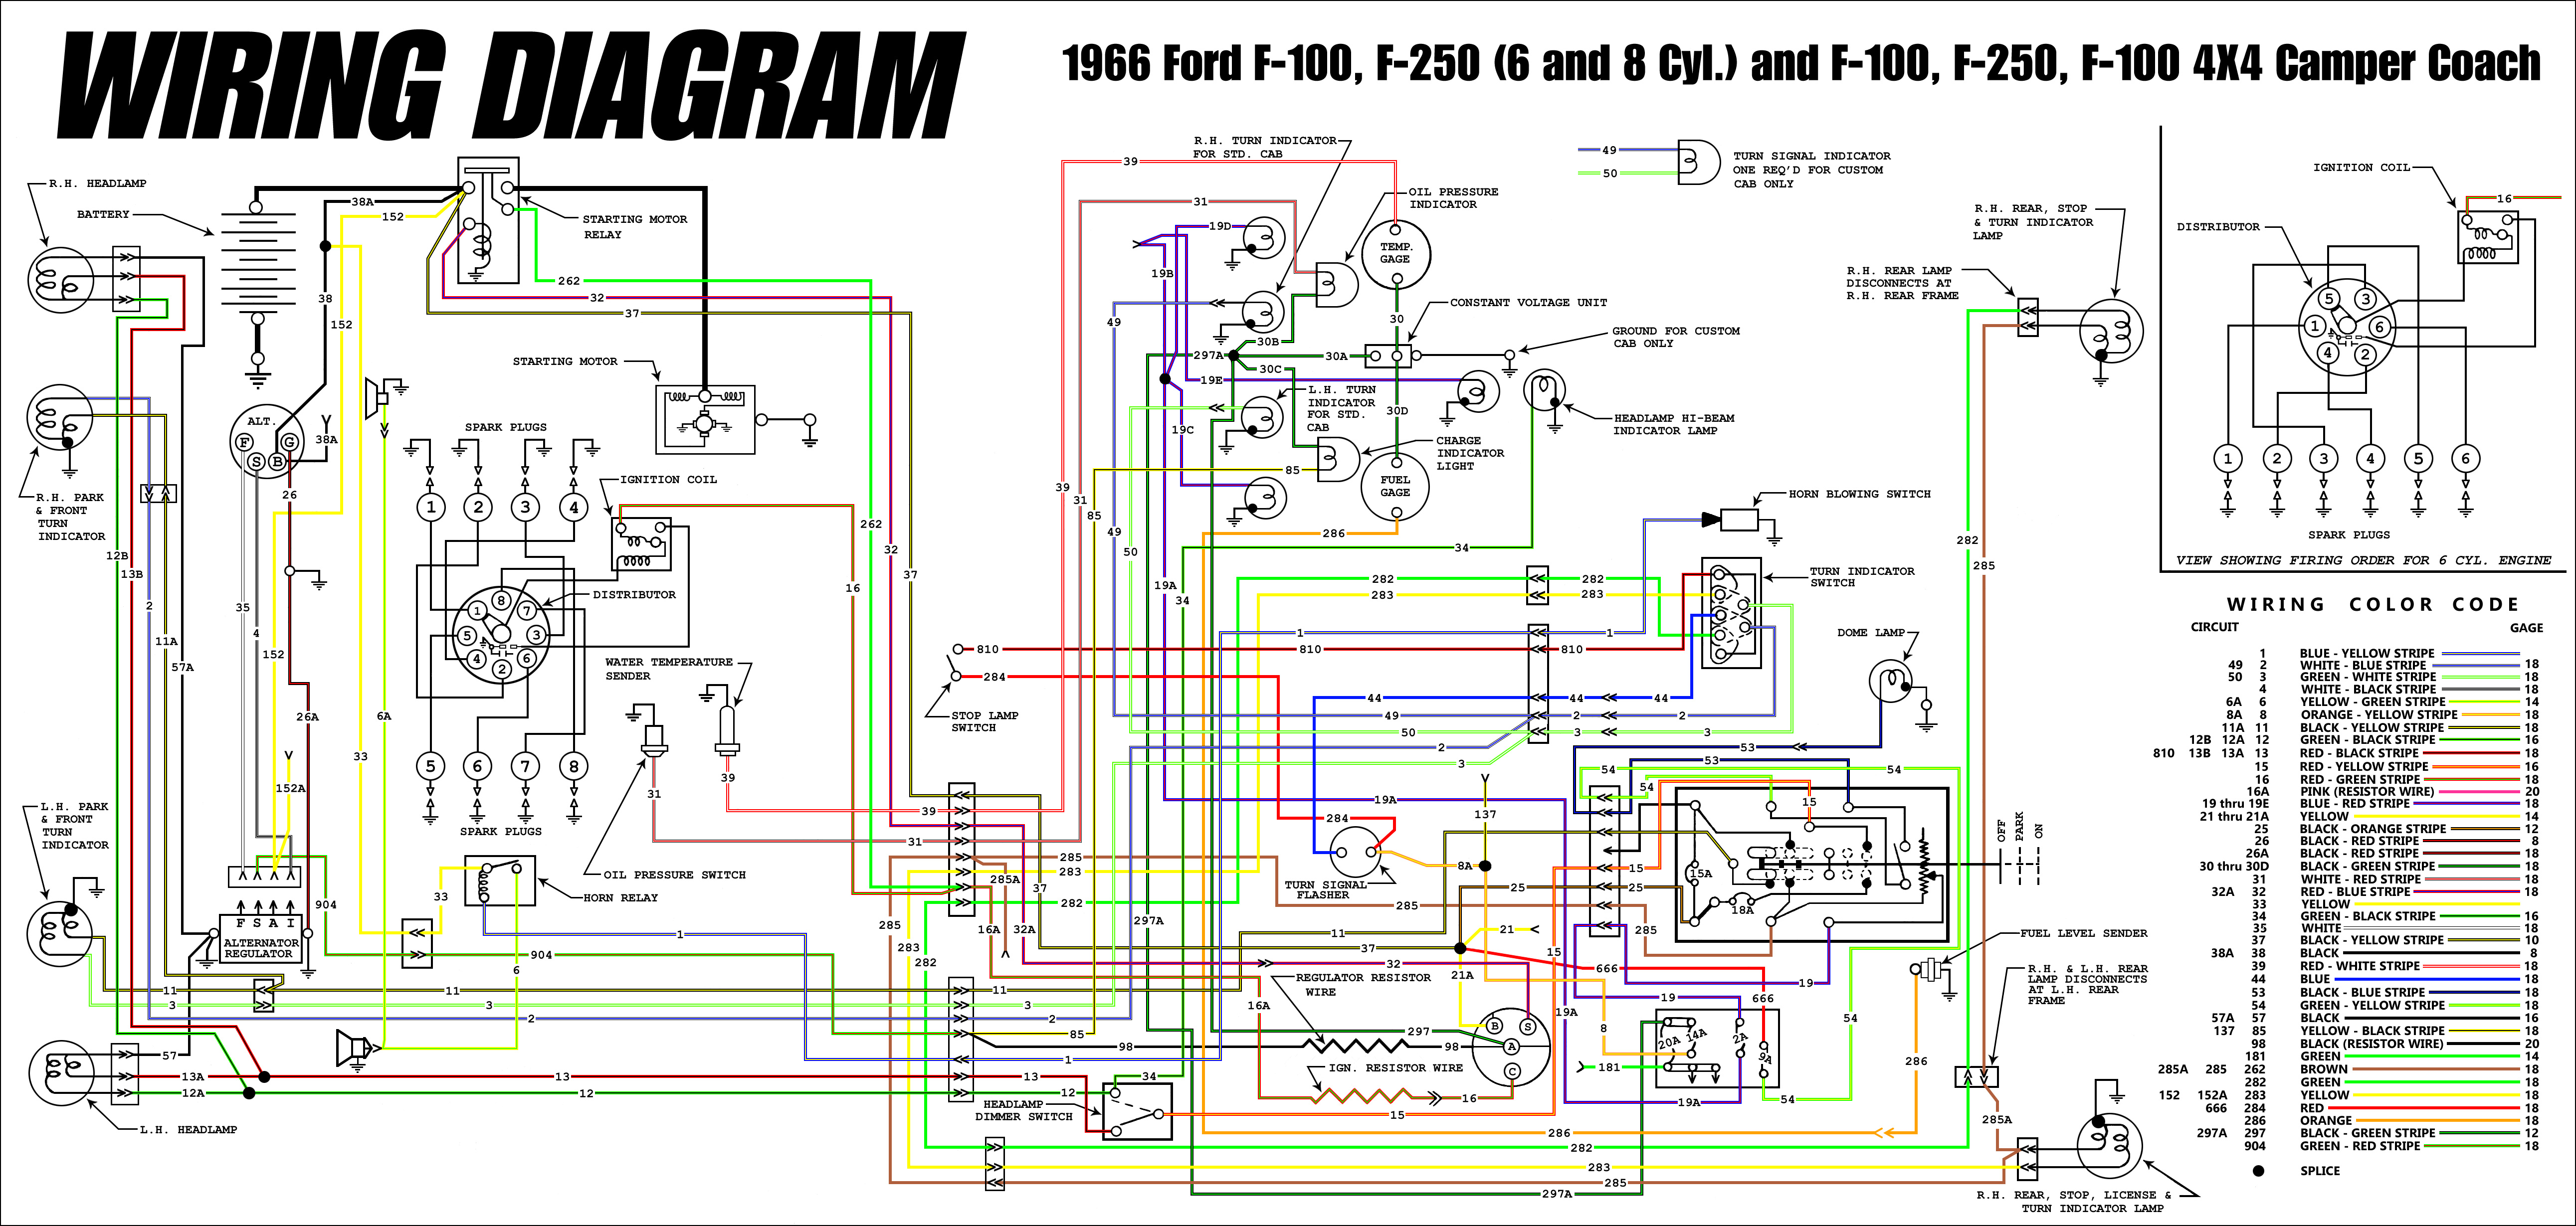 1966 Ford Truck Wiring Diagrams - FORDification.info - The ... wiring diagram for 1966 ford ltd 